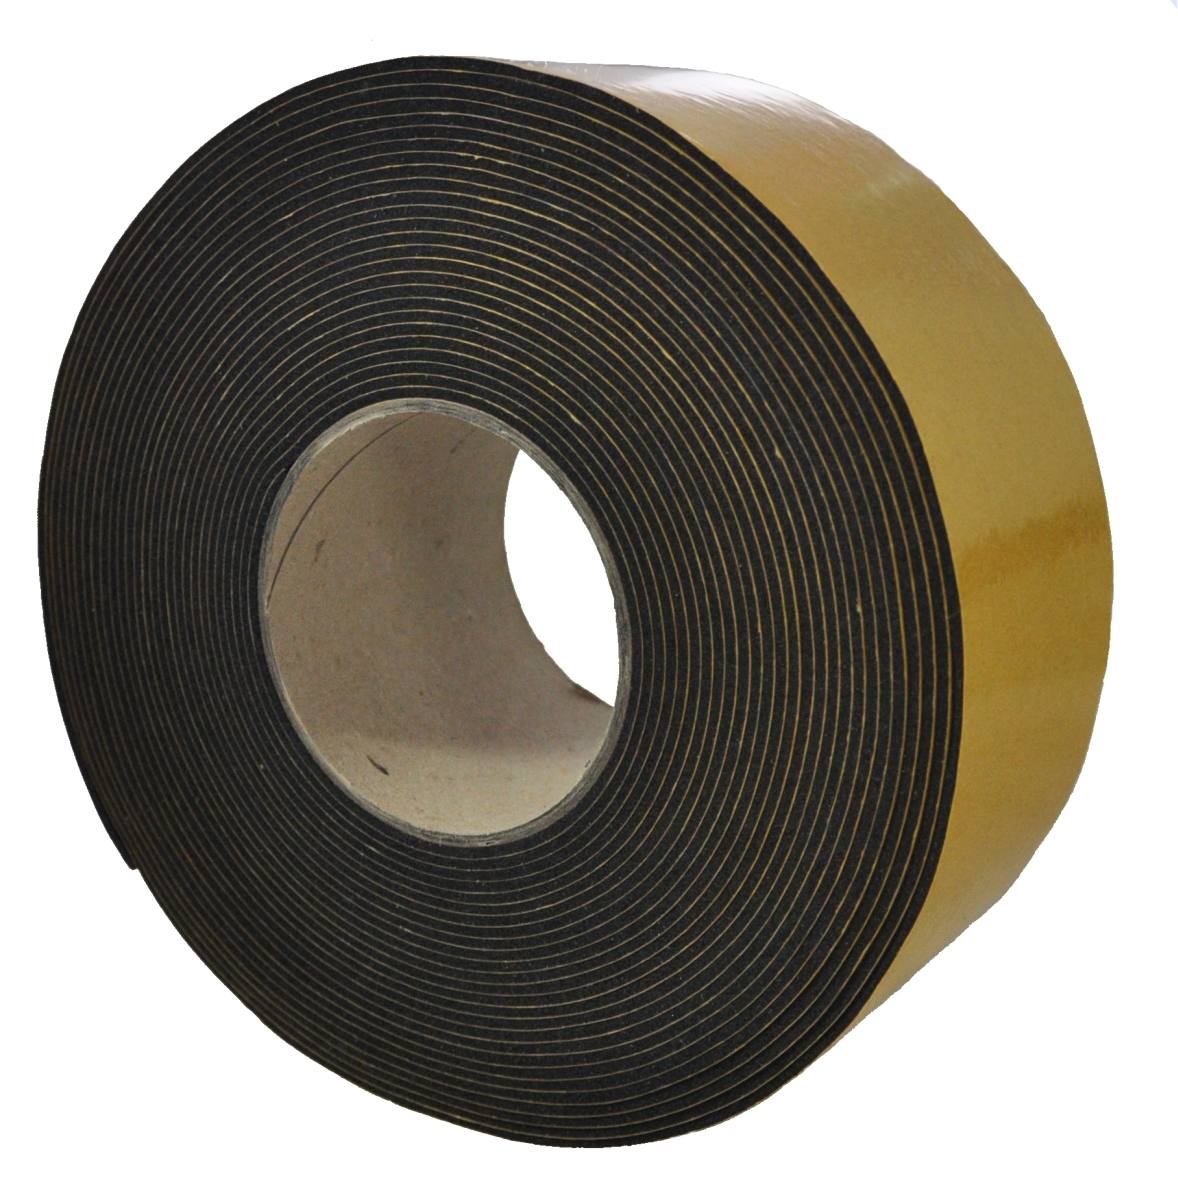 S-K-S EPDM 4mmx25mmx10m black self-adhesive on one side